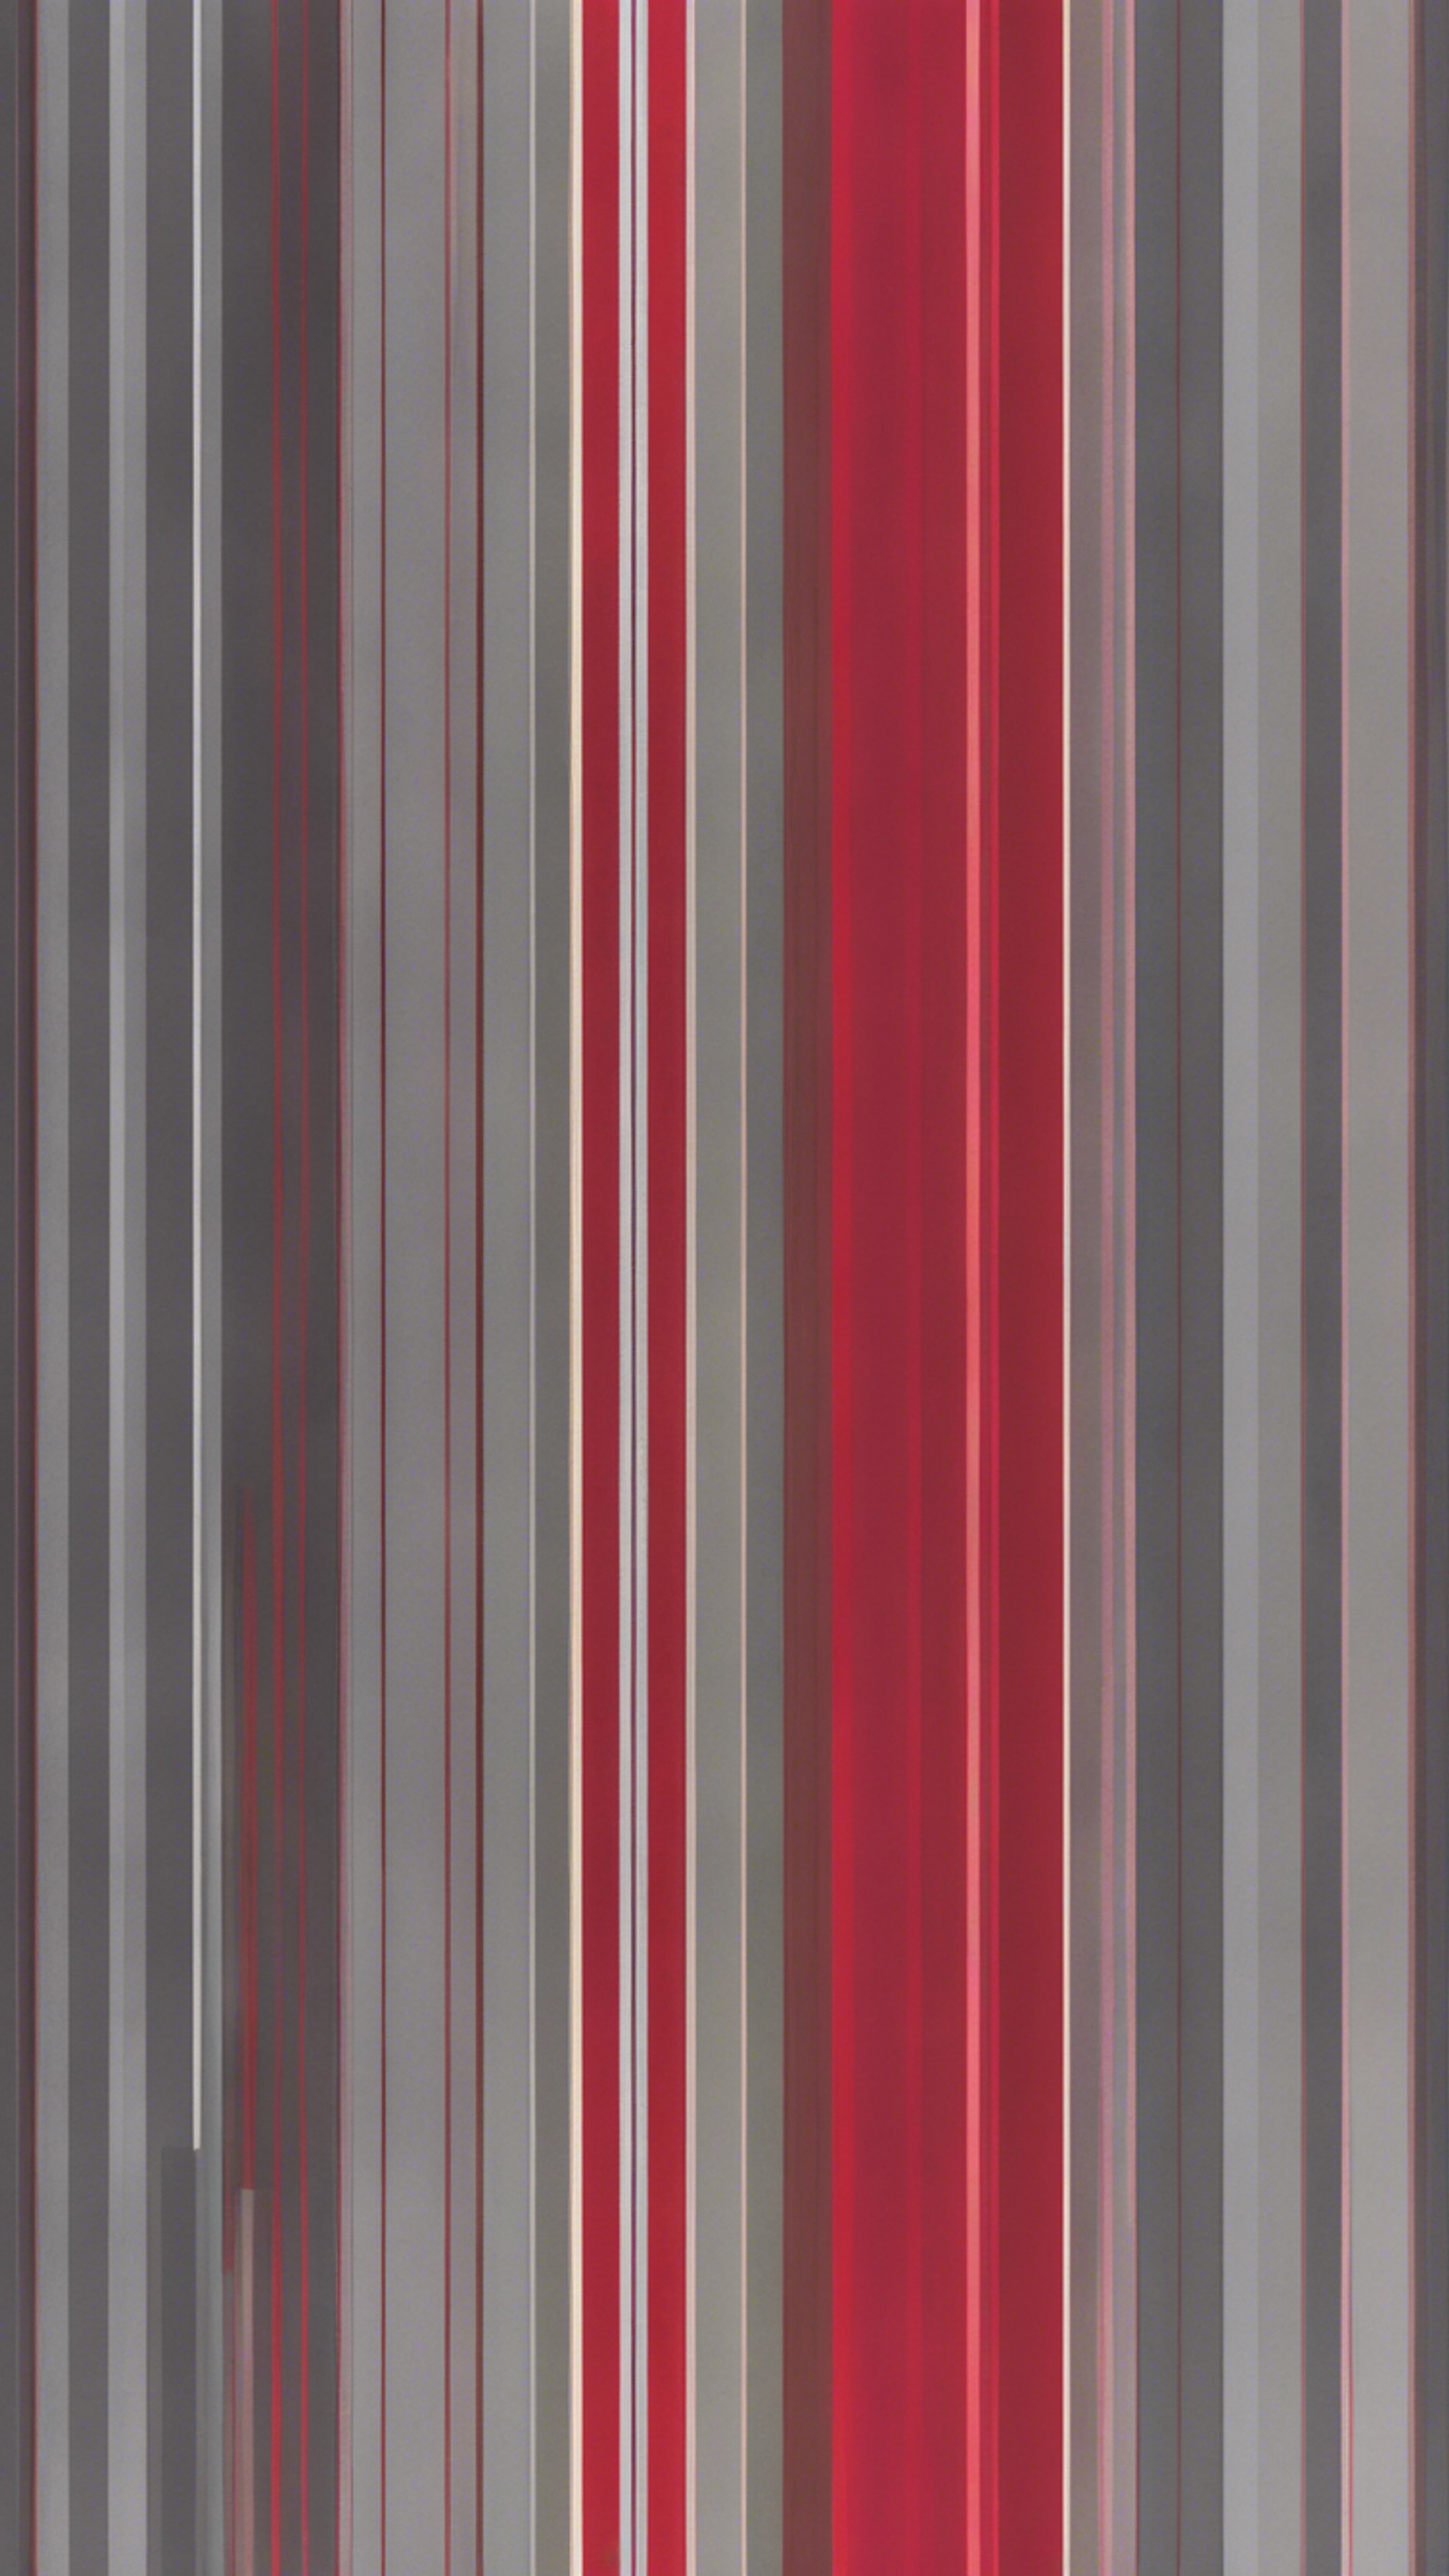 Pattern inspired by modern art, showcasing alternating bands of red and grey in a gradient arrangement. Papel de parede[fecd92d91f0c4817b510]